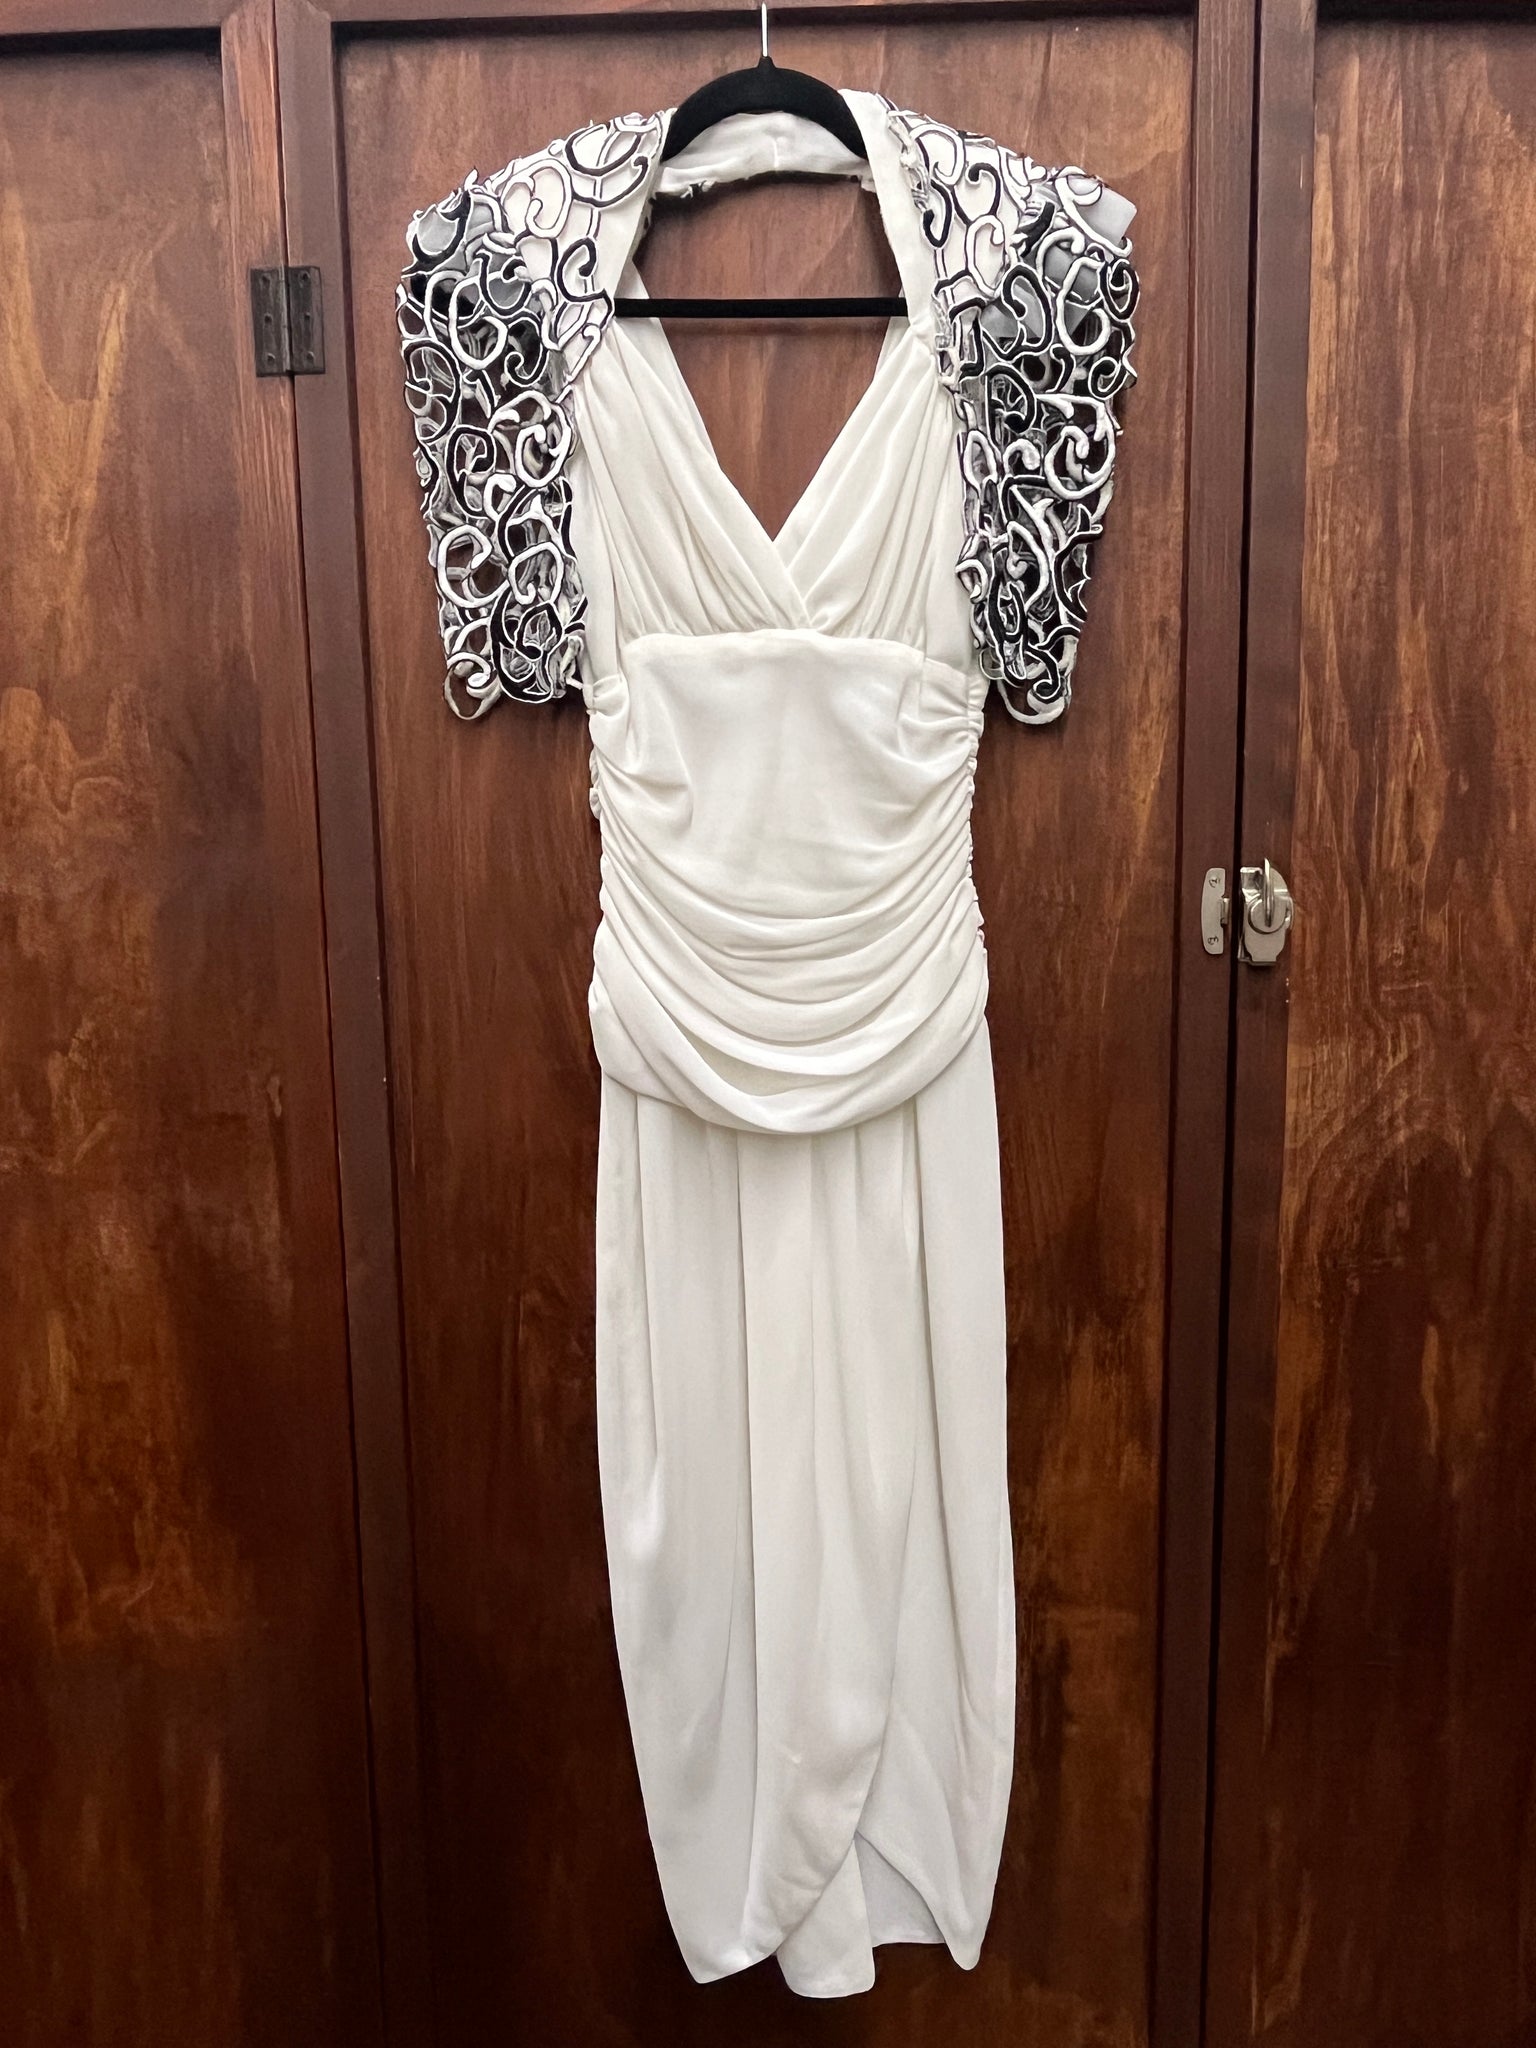 1980s DRESS- Casadei white ruched dress with embroidery sleeves